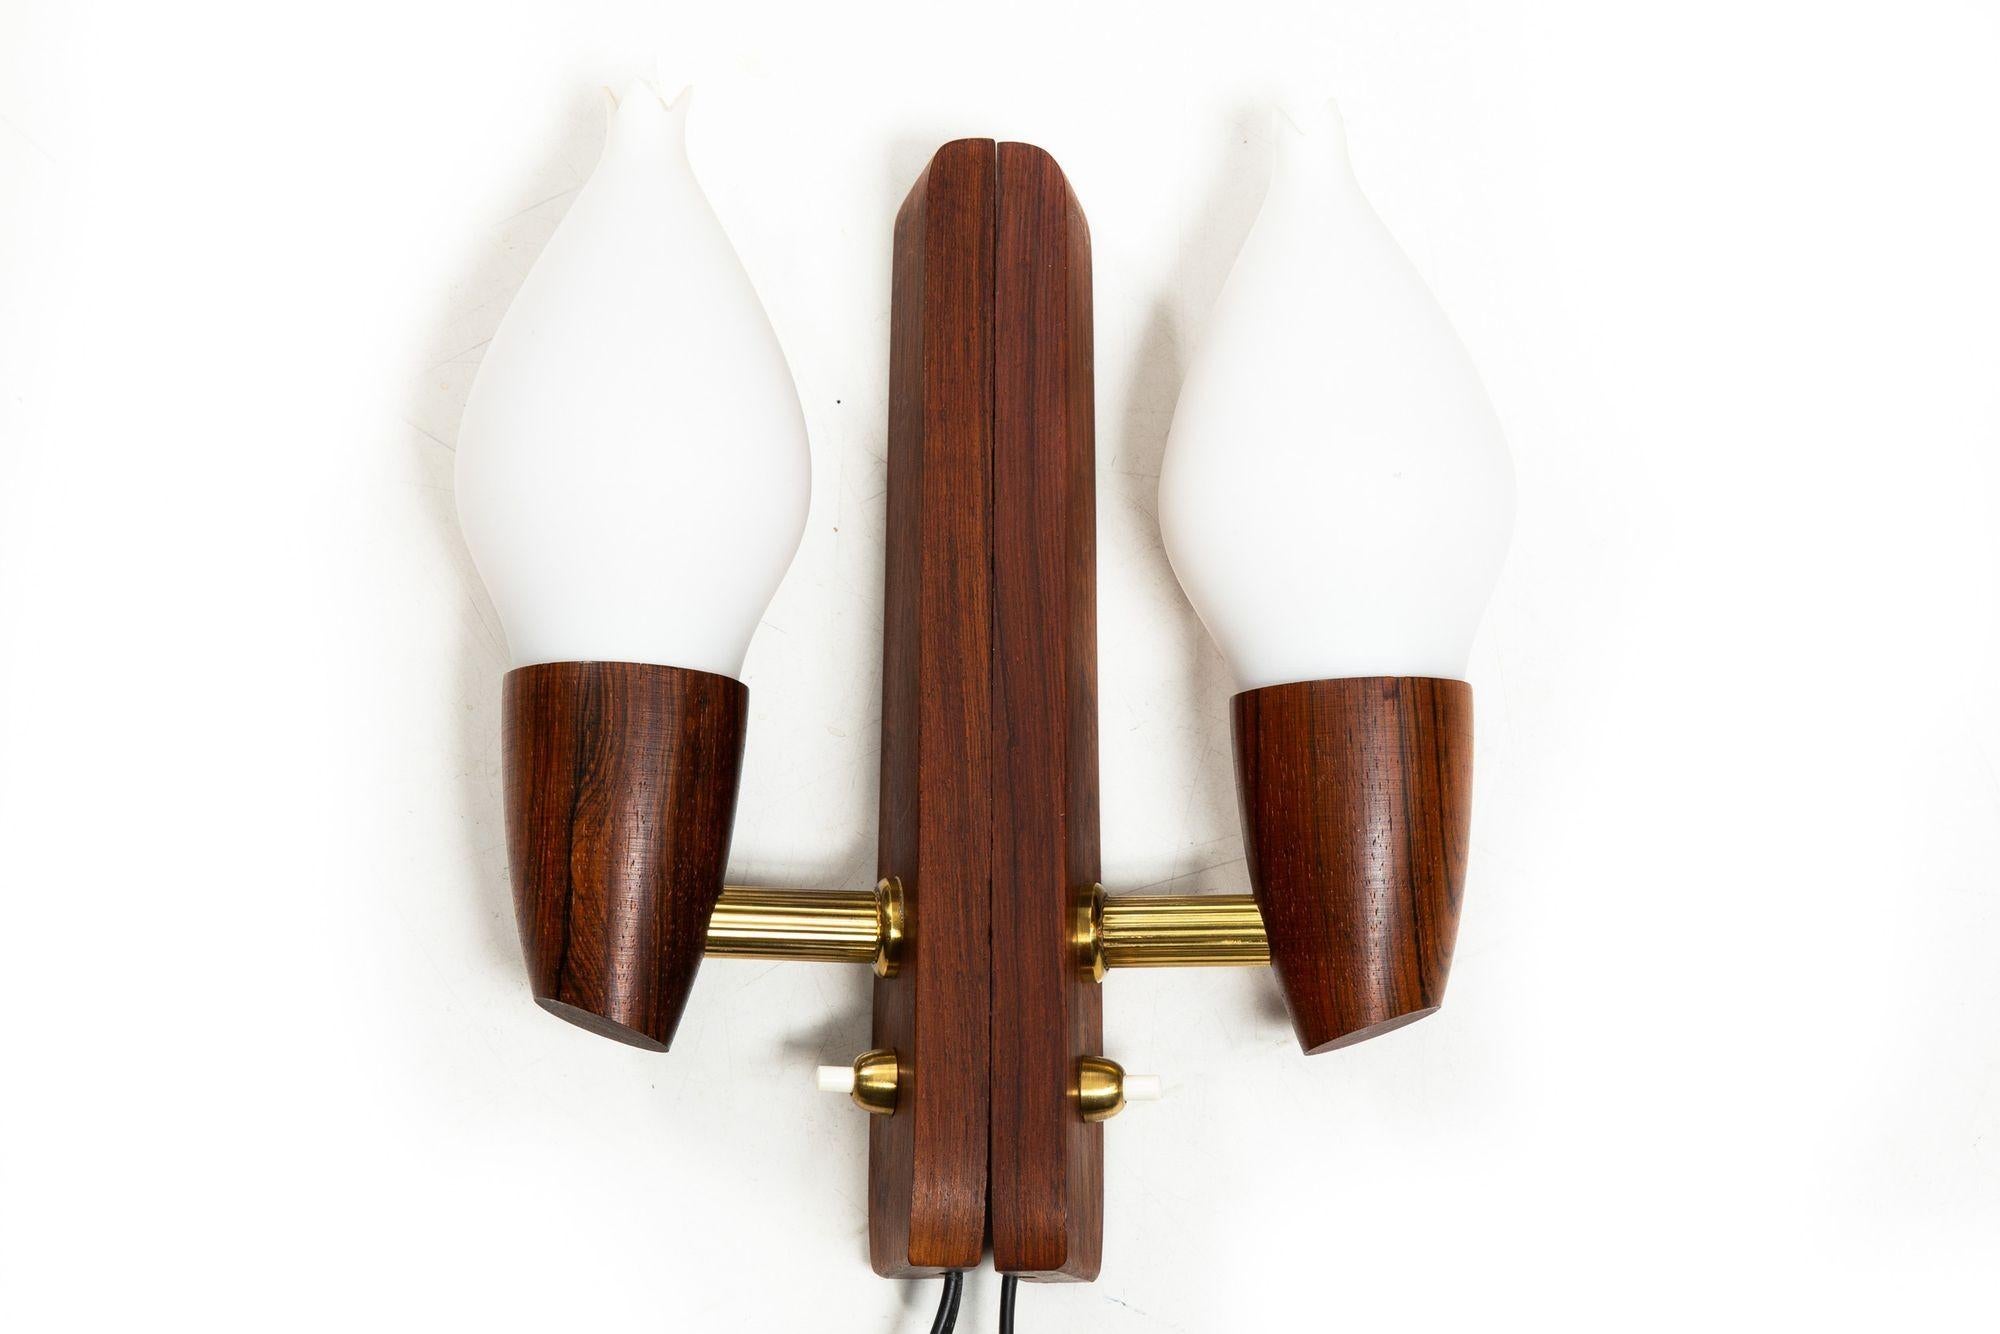 PAIR OF DANISH MODERN ROSEWOOD AND FROSTED-GLASS WALL SCONCES
With original label on the back for Vitrika, Denmark
Item # 311VNK02P

A very sleek pair of sculpted rosewood wall sconces by the Danish lighting firm Vitrika from the 1970s, they feature